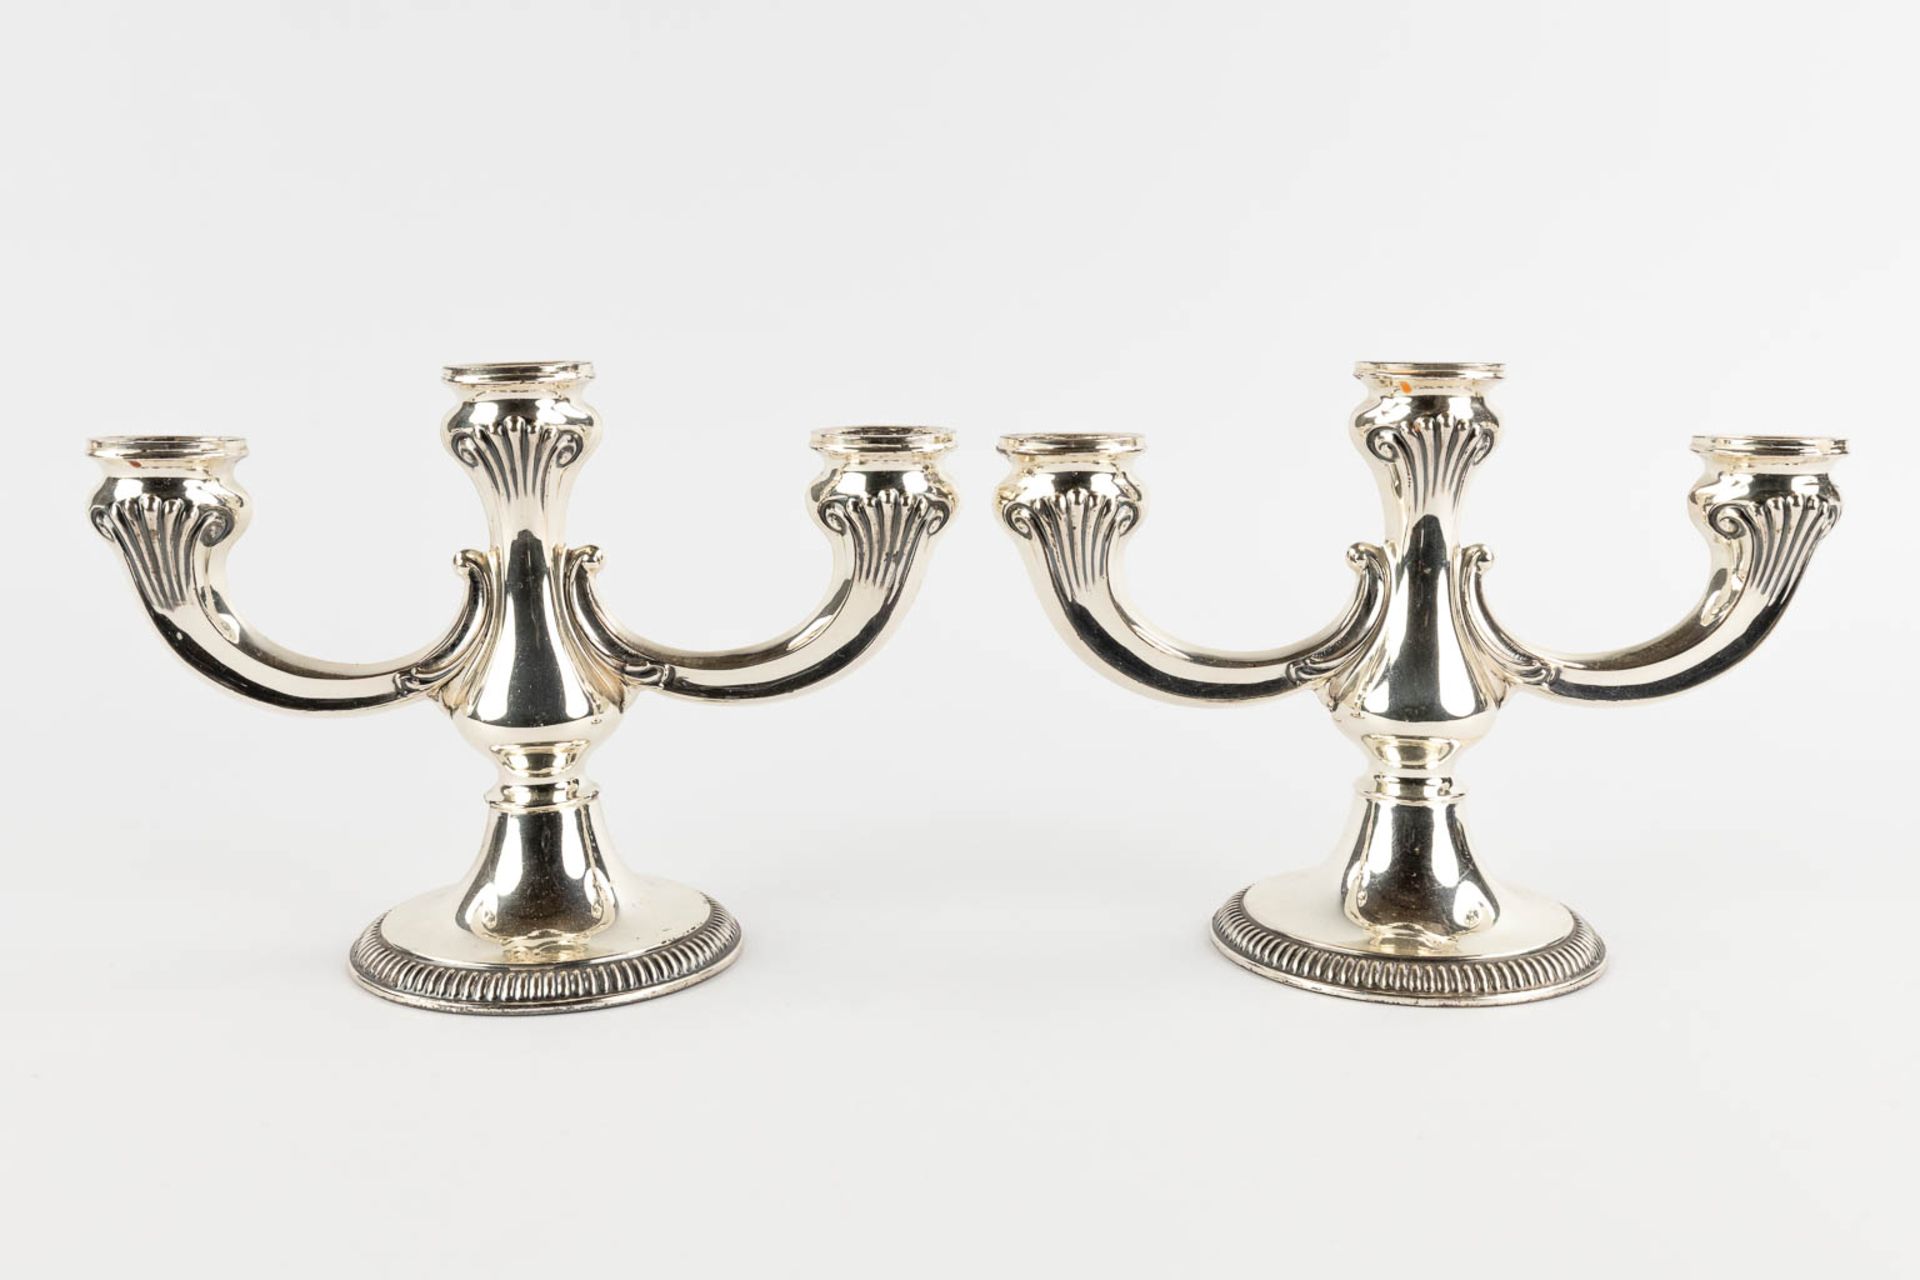 A pair of candelabra, silver. A835. gross: 589g (D:9 x W:20 x H:14 cm) - Image 3 of 10